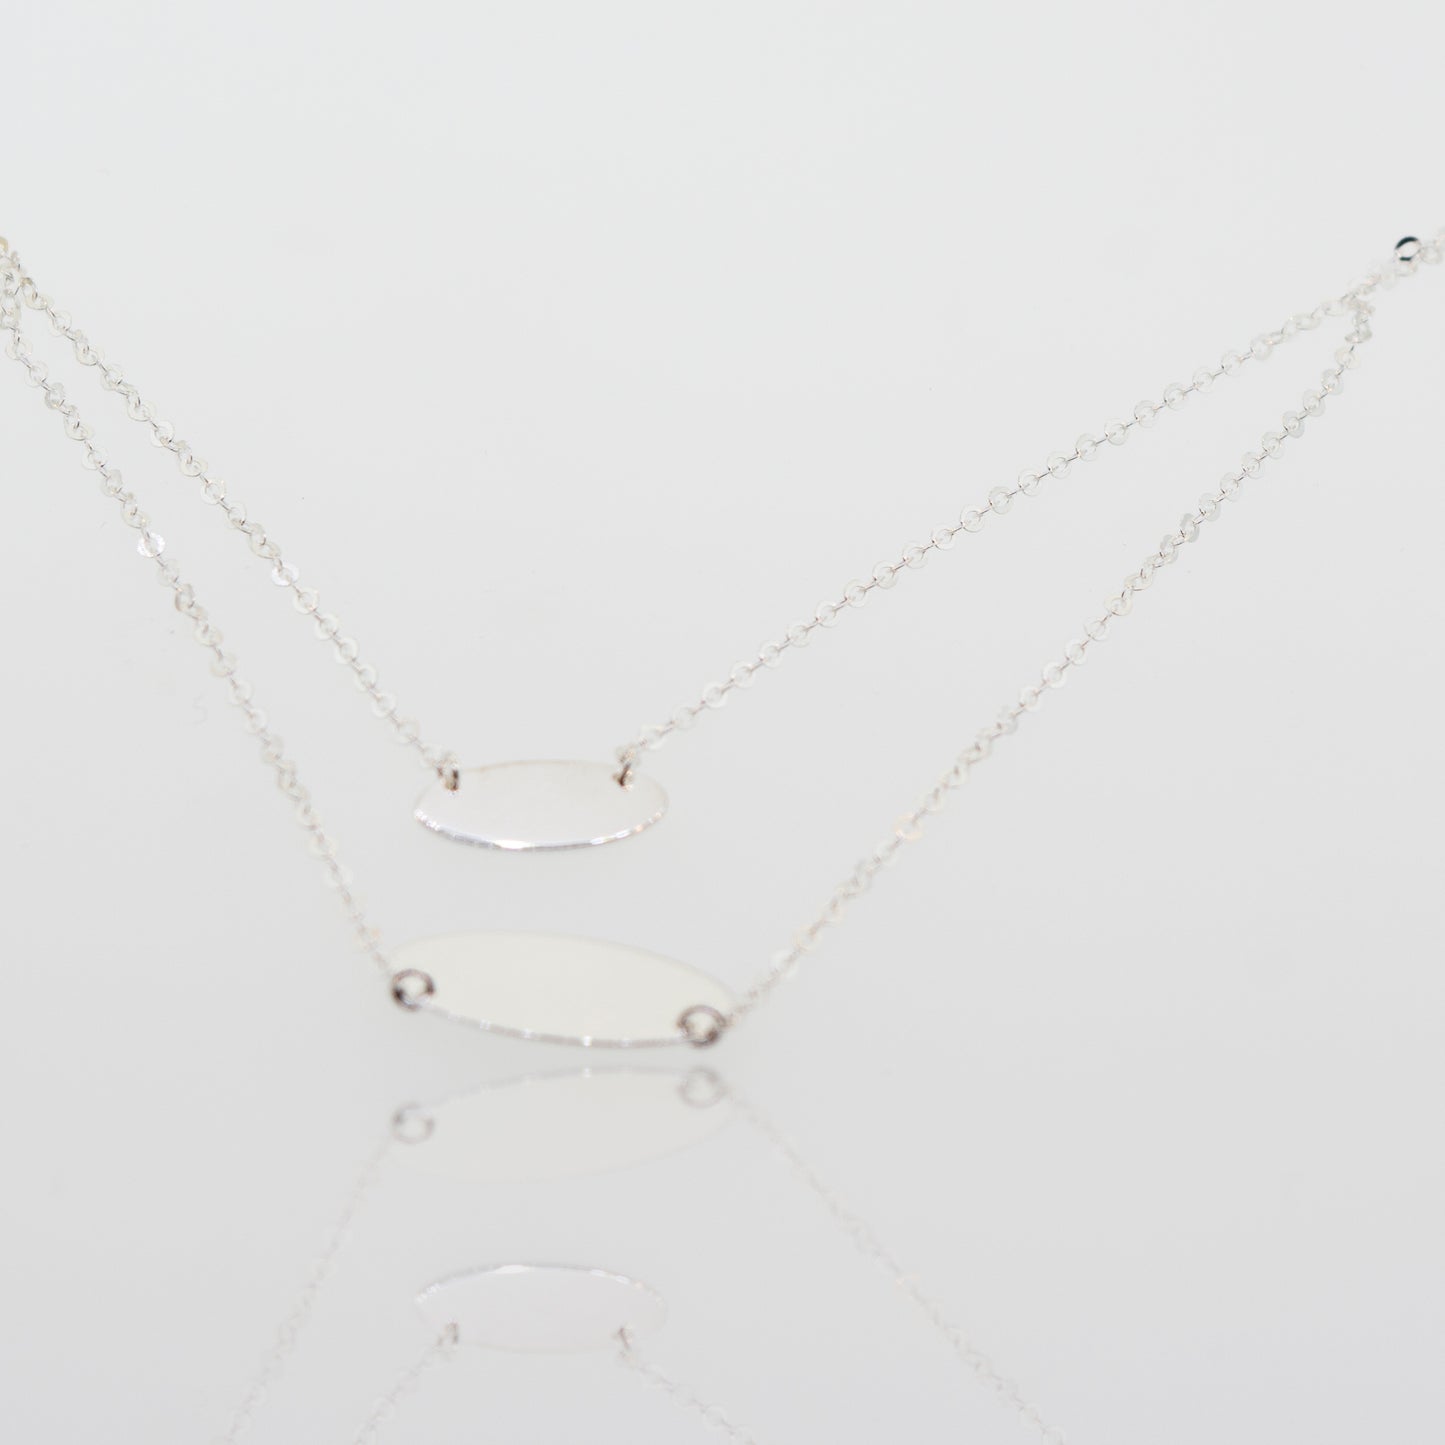 Two adjustable Super Silver sterling silver necklace with oval discs pendants on a white surface.